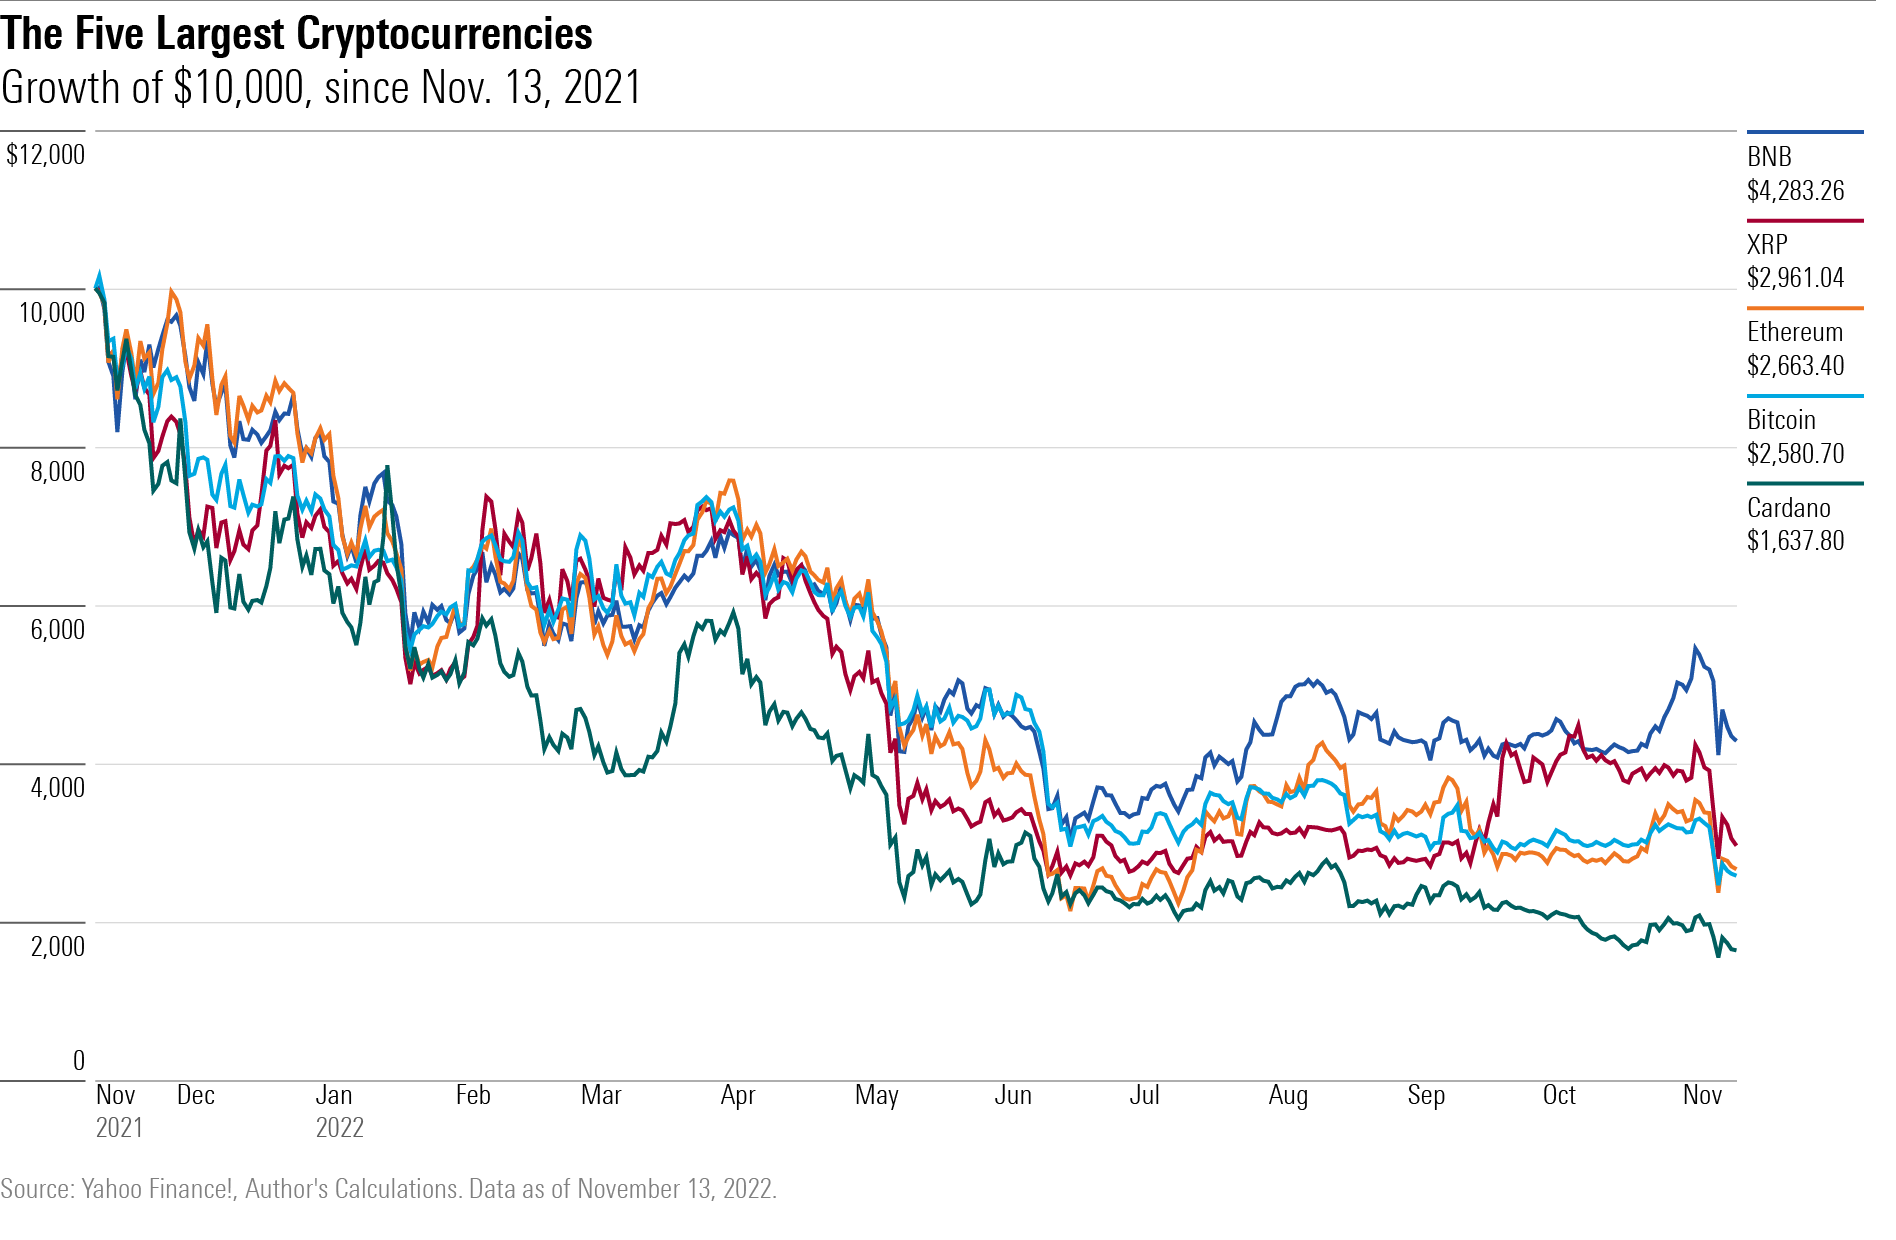 The growth of $10,000 for the top five cryptocurrencies from November 13, 2021 to November 11, 2022.